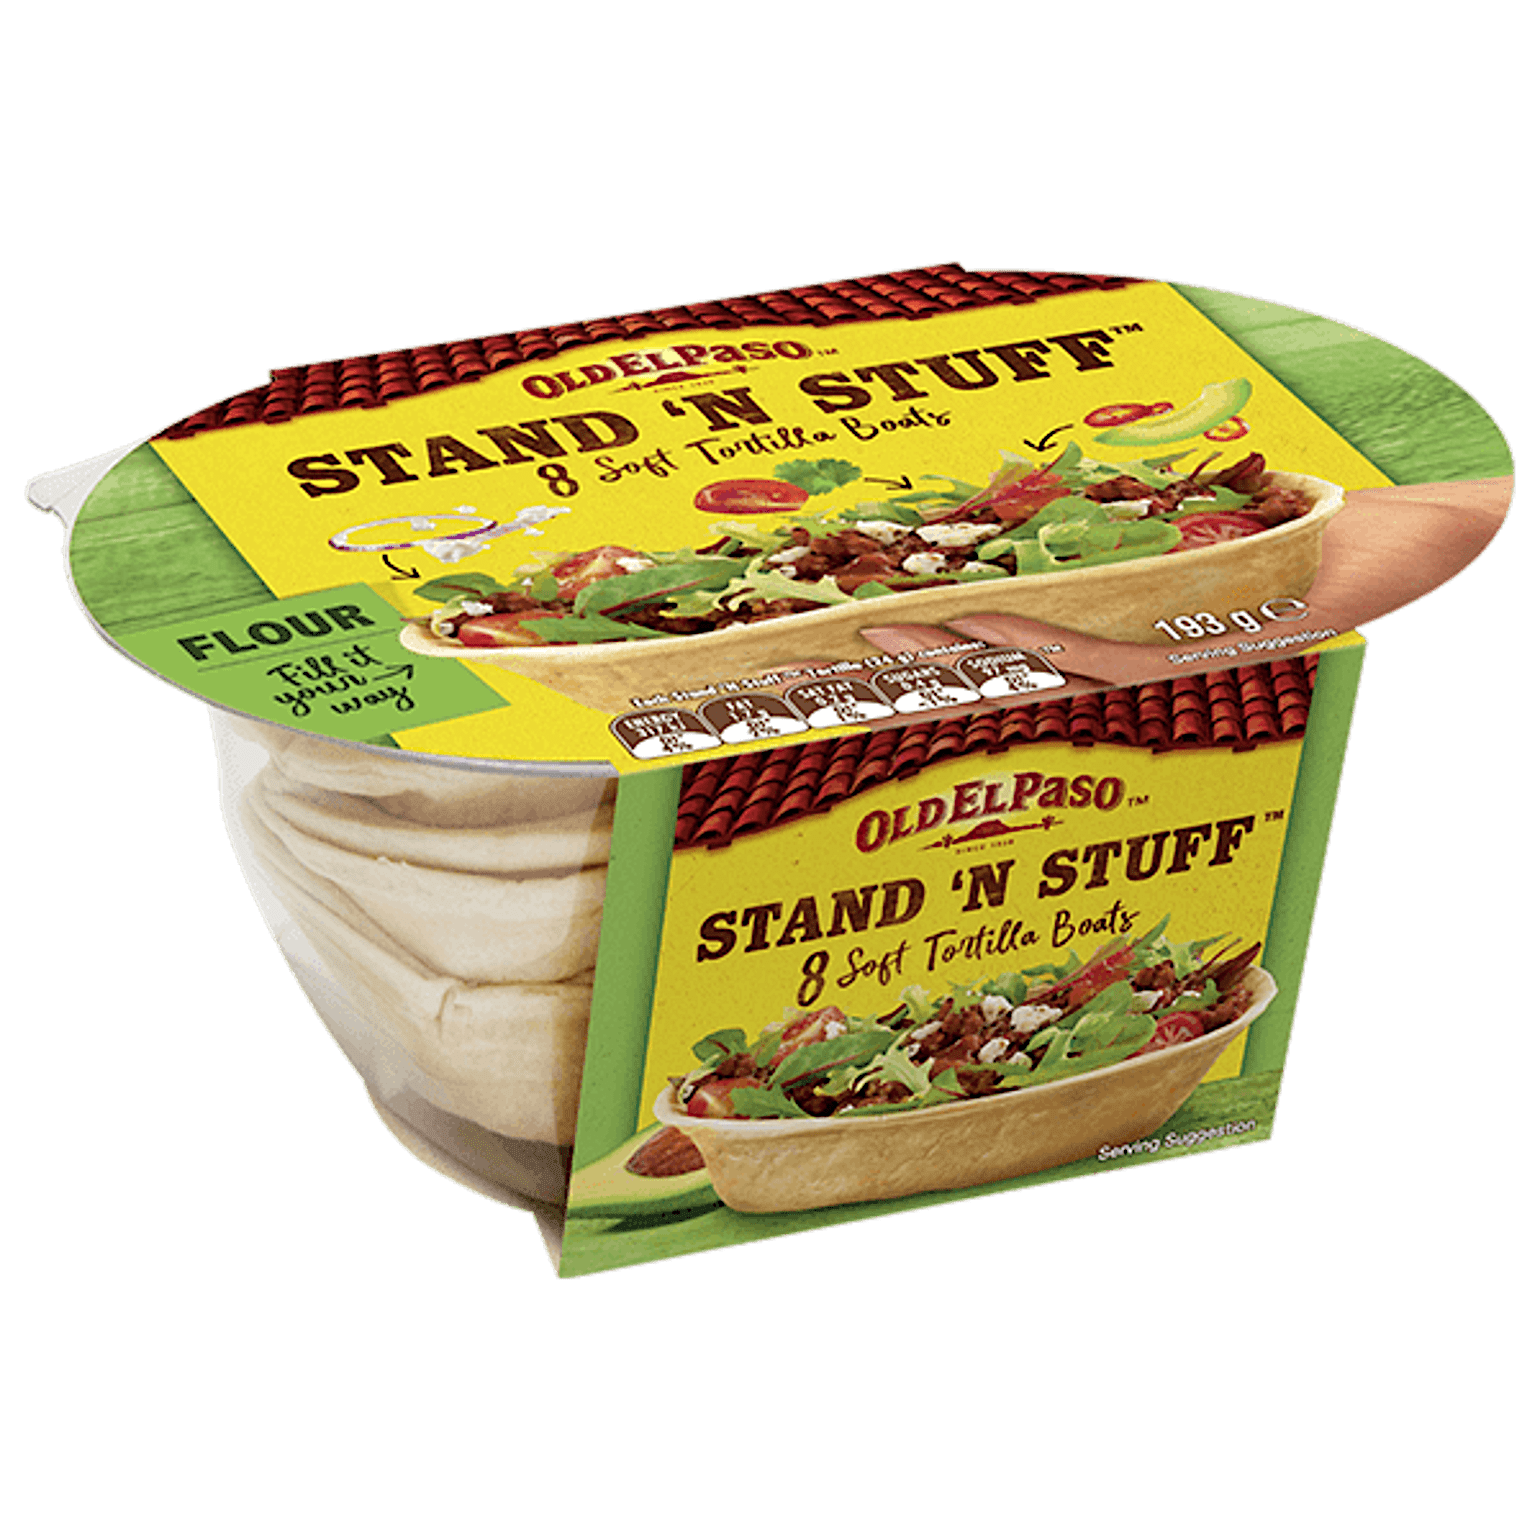 a pack of Old El Paso's stand n stuff 8 soft tortilla boats (193g)